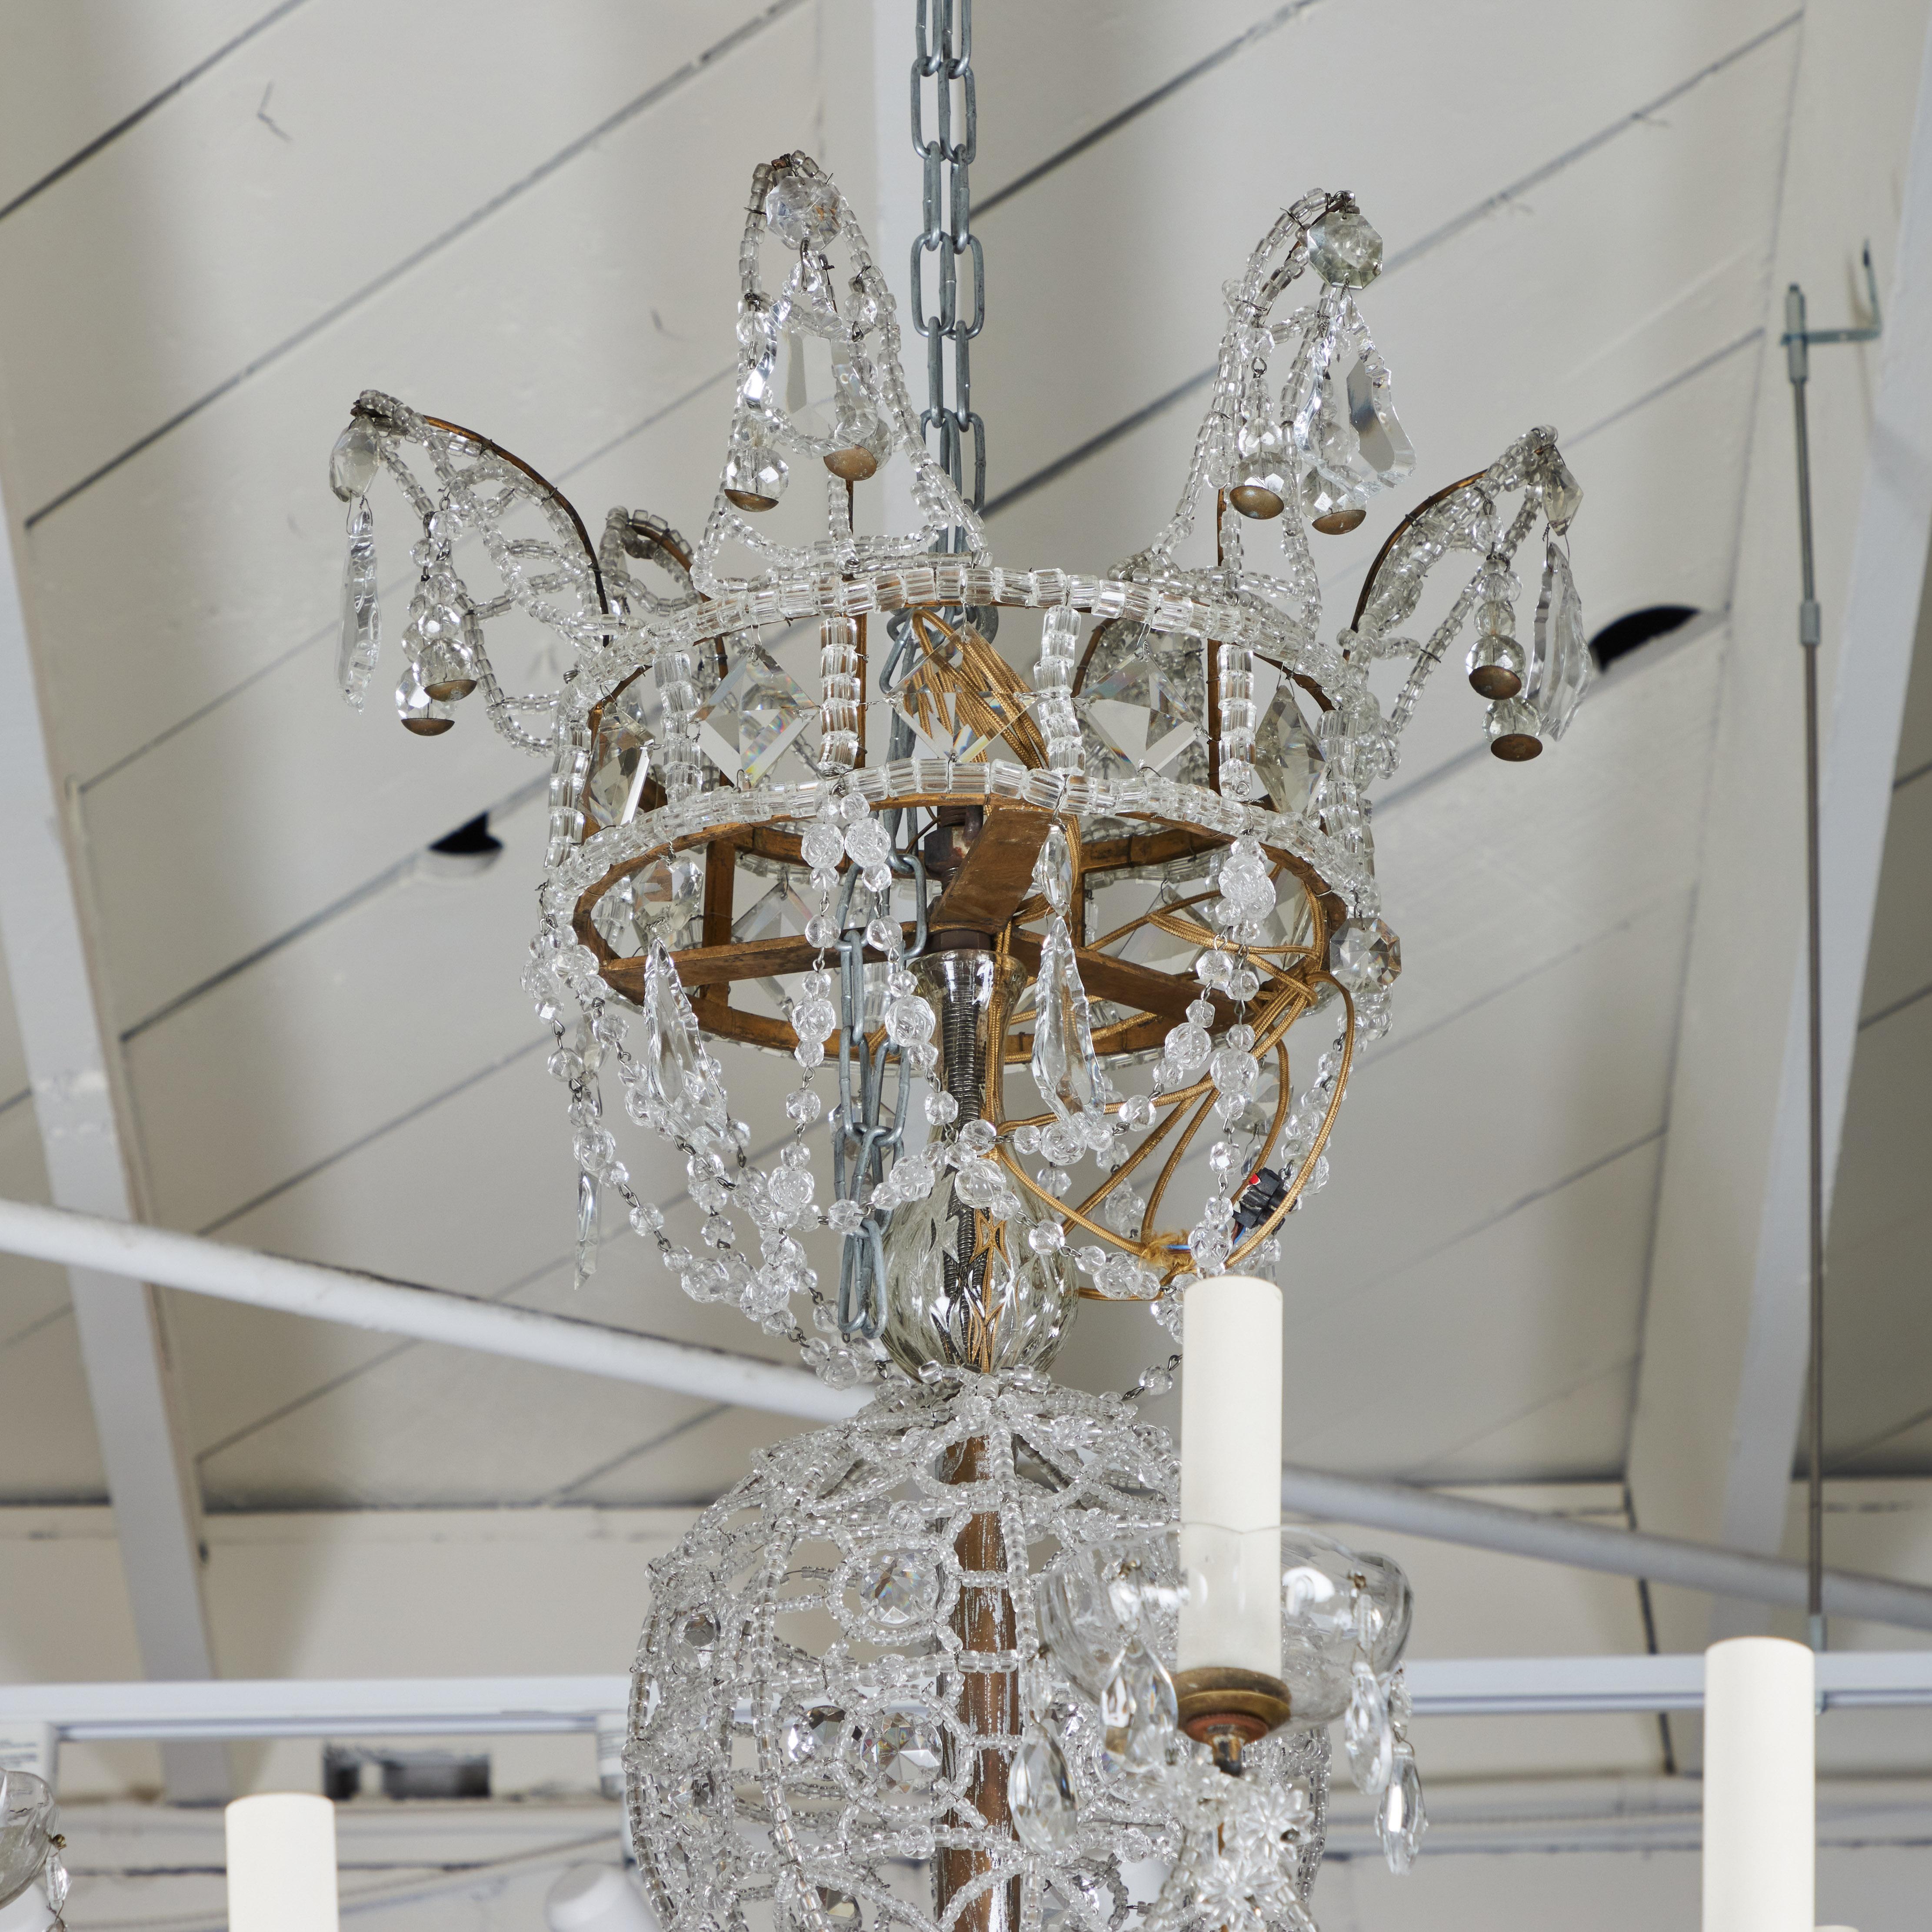 A stunning, large, beaded crystal chandelier with scalloped placards and spheres. The arms are gilded metal and the shaft with sphere shapes terminates in a gilt-wood floret and large crystal orb.  Crystal bobeches with tear drops.  18 lights.  From